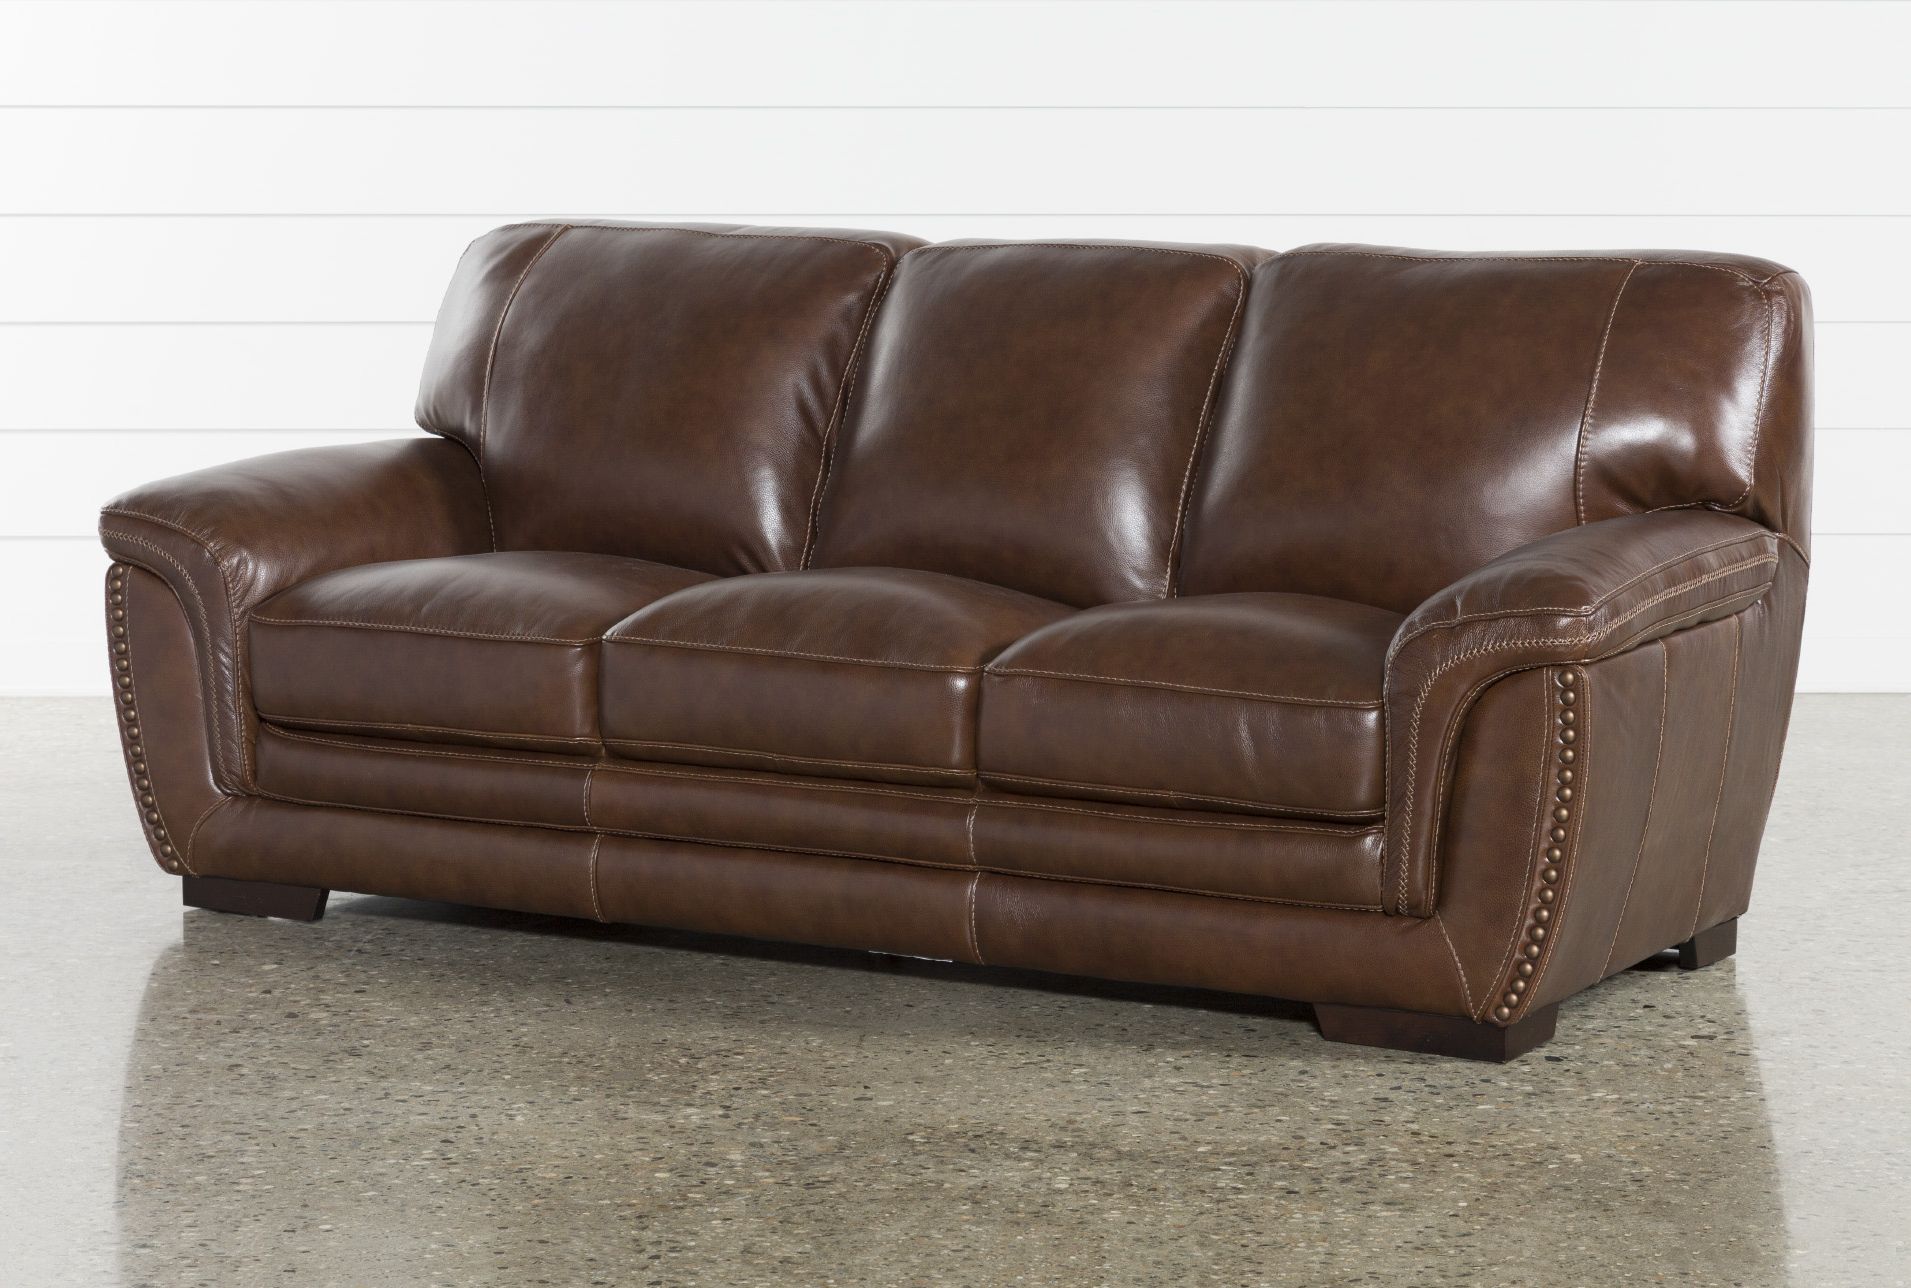 Get Brown Leather Sofa – Its Classy And Practical Throughout Faux Leather Sofas In Dark Brown (View 16 of 20)